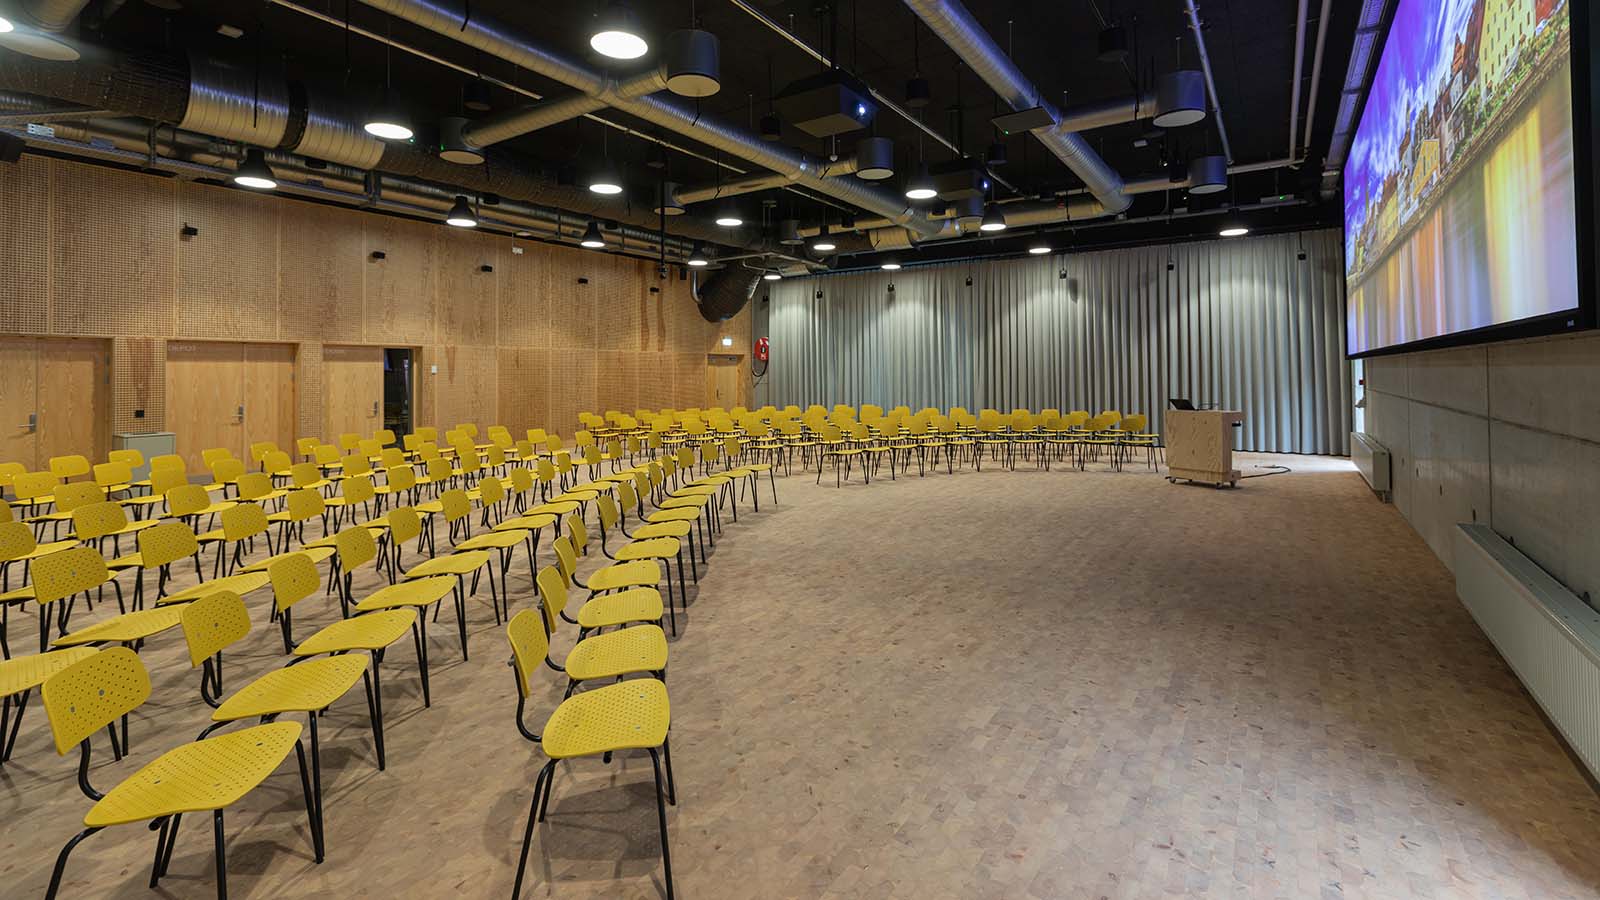 Meyer Sound Constellation Acoustic System Enhances Learning at Danish Architecture School